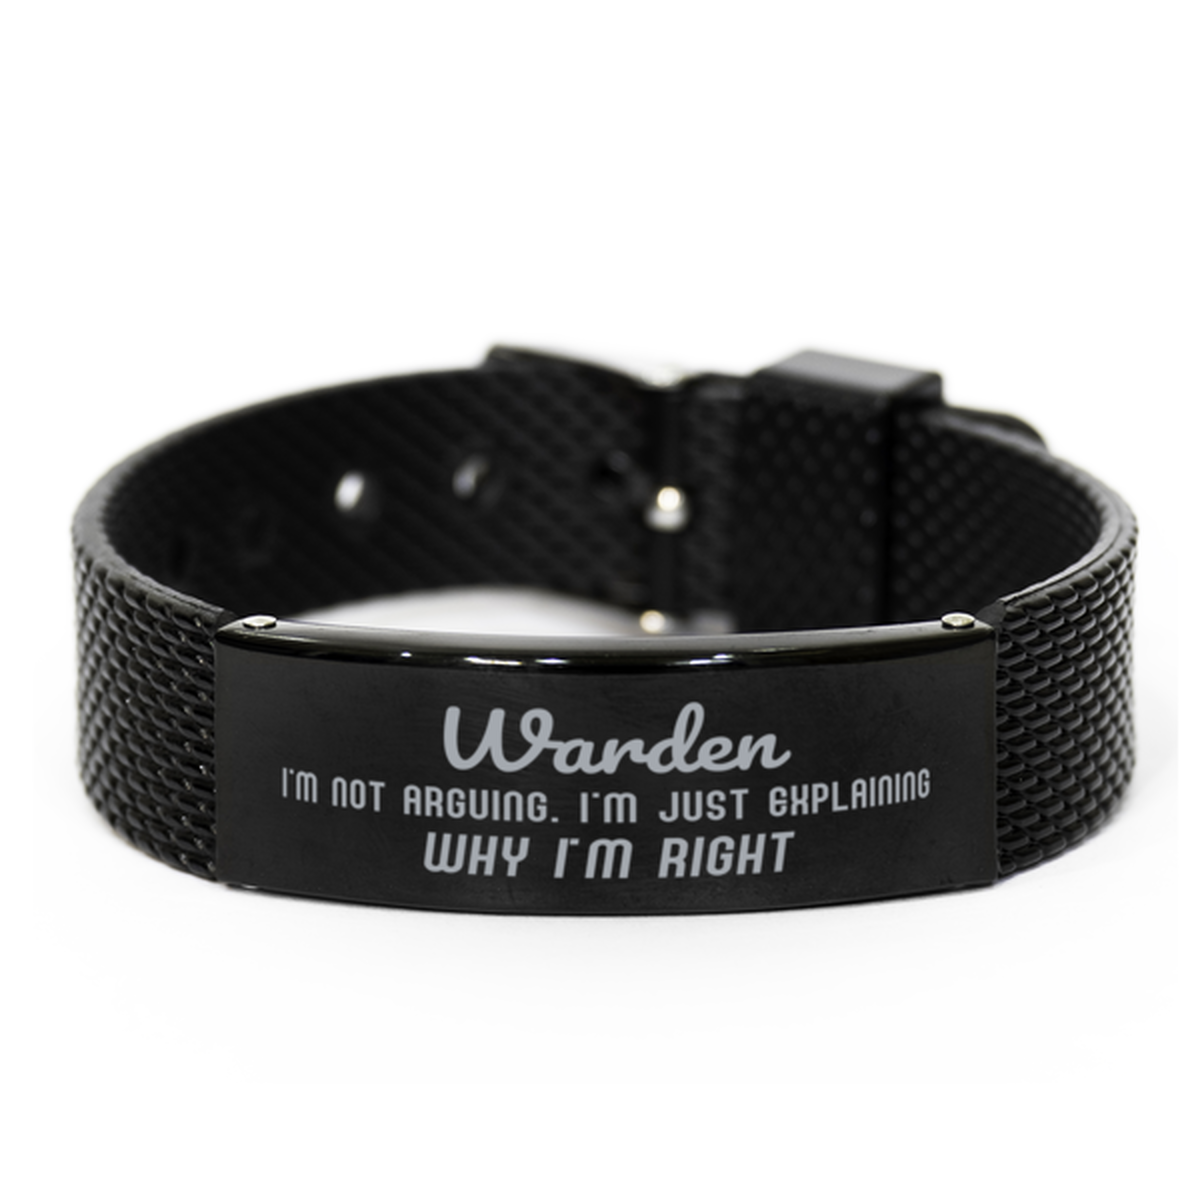 Warden I'm not Arguing. I'm Just Explaining Why I'm RIGHT Black Shark Mesh Bracelet, Funny Saying Quote Warden Gifts For Warden Graduation Birthday Christmas Gifts for Men Women Coworker